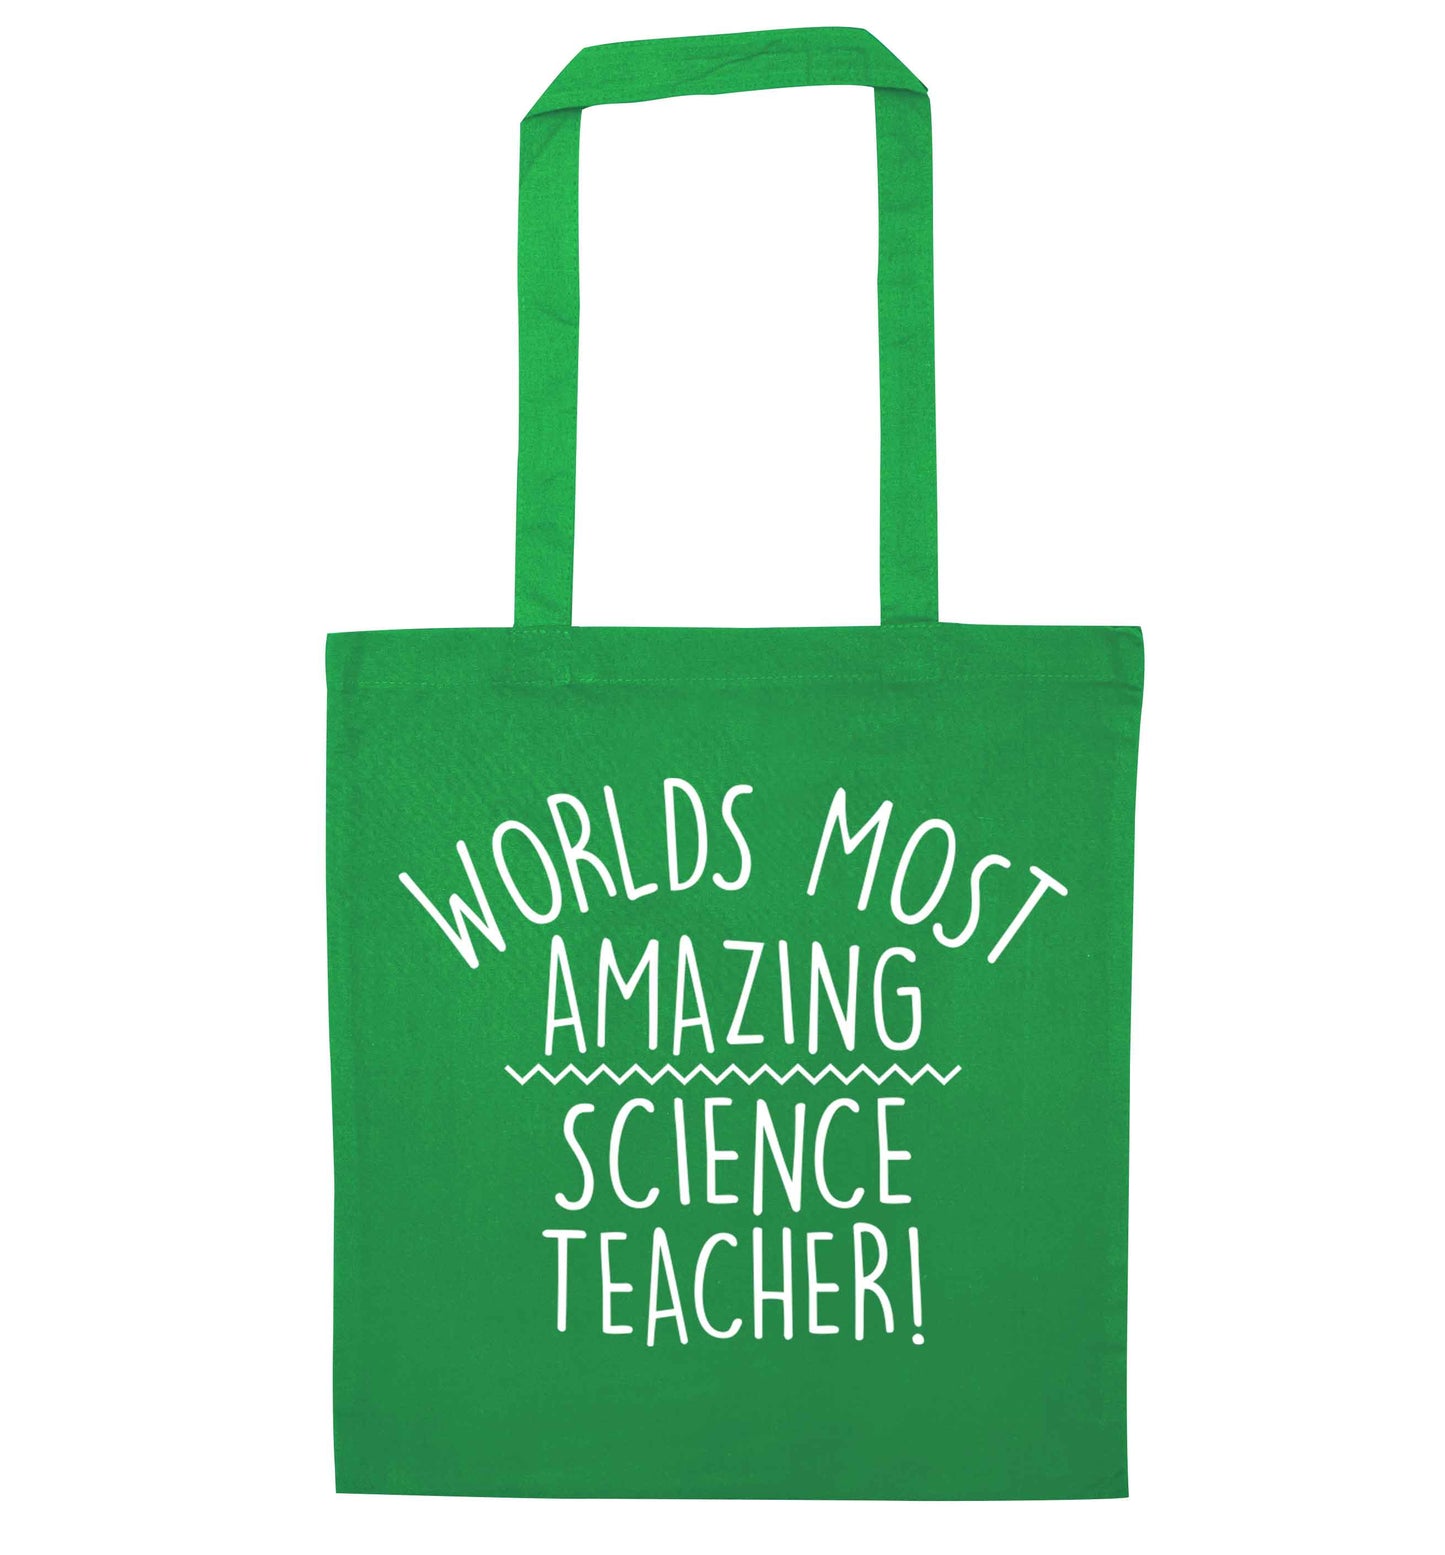 Worlds most amazing science teacher green tote bag